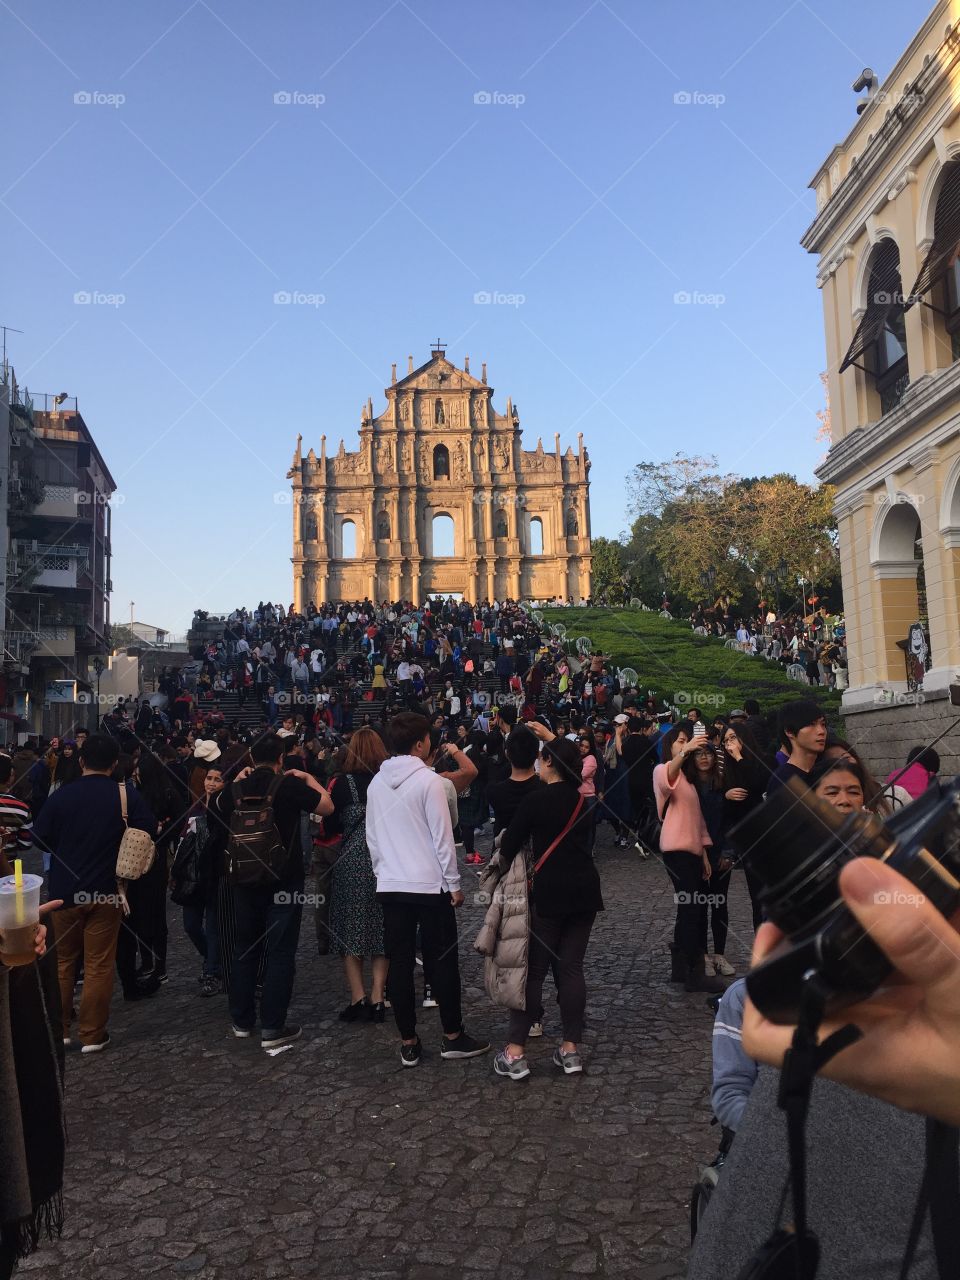 The street of Macau are filled with people and cameras. Dodging and weaving around curious travelers is half the excitement, or displeasure, of reaching the beautiful ruins of St. Paul's.